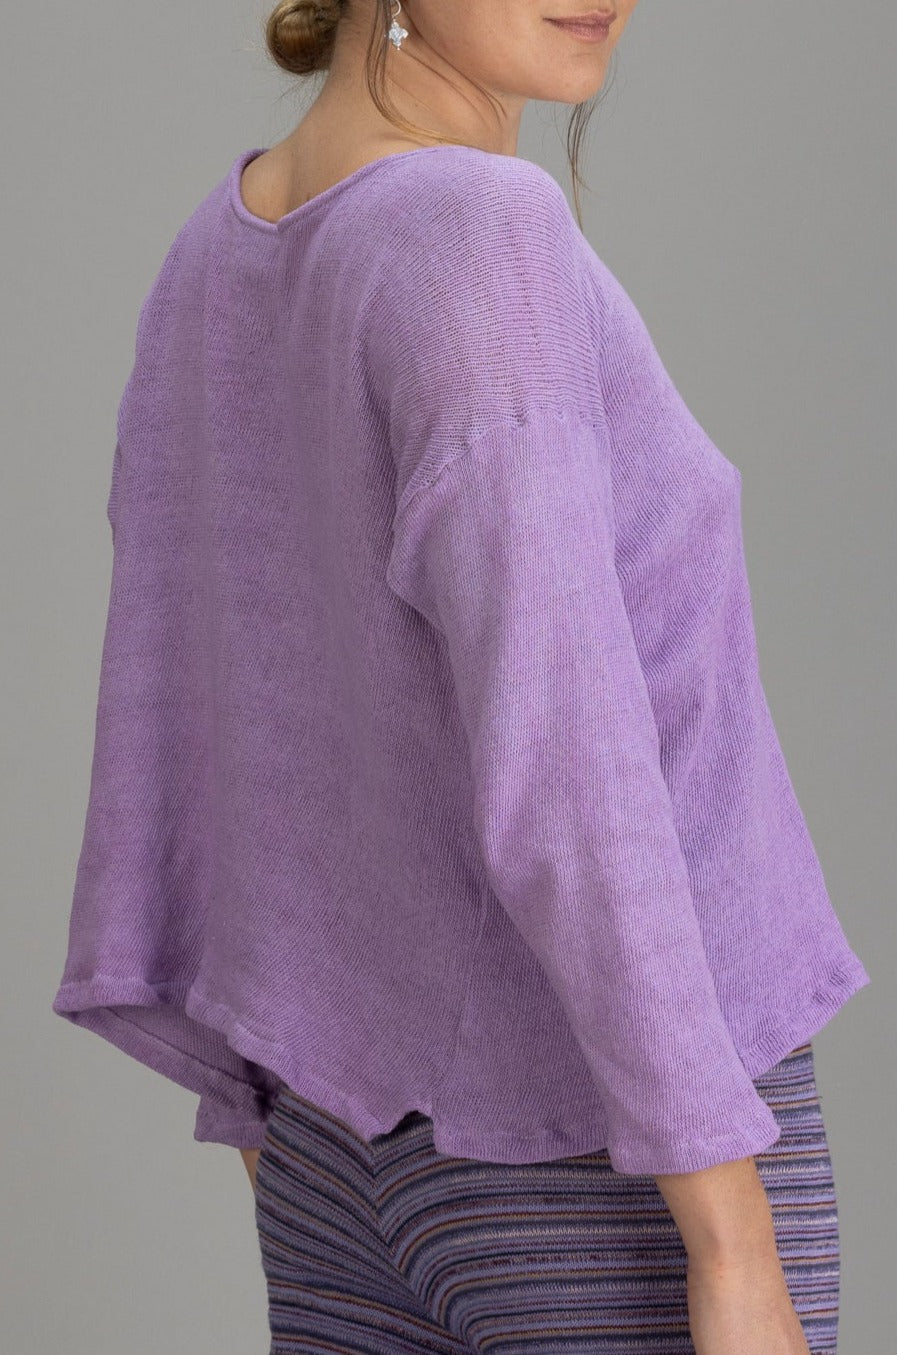 WEDNESDAY SWEATER  - Lilac